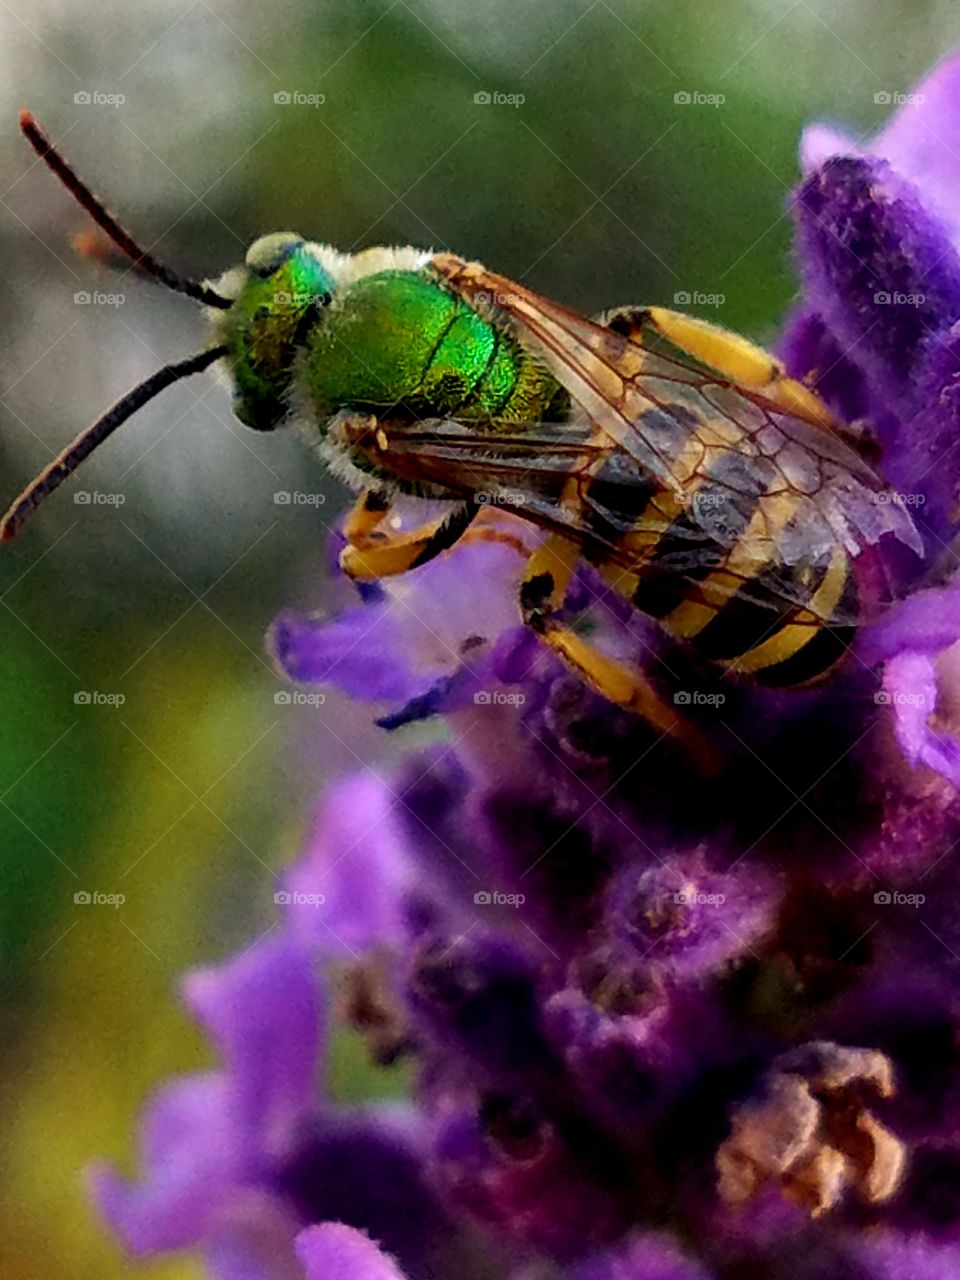 A bee doing his business